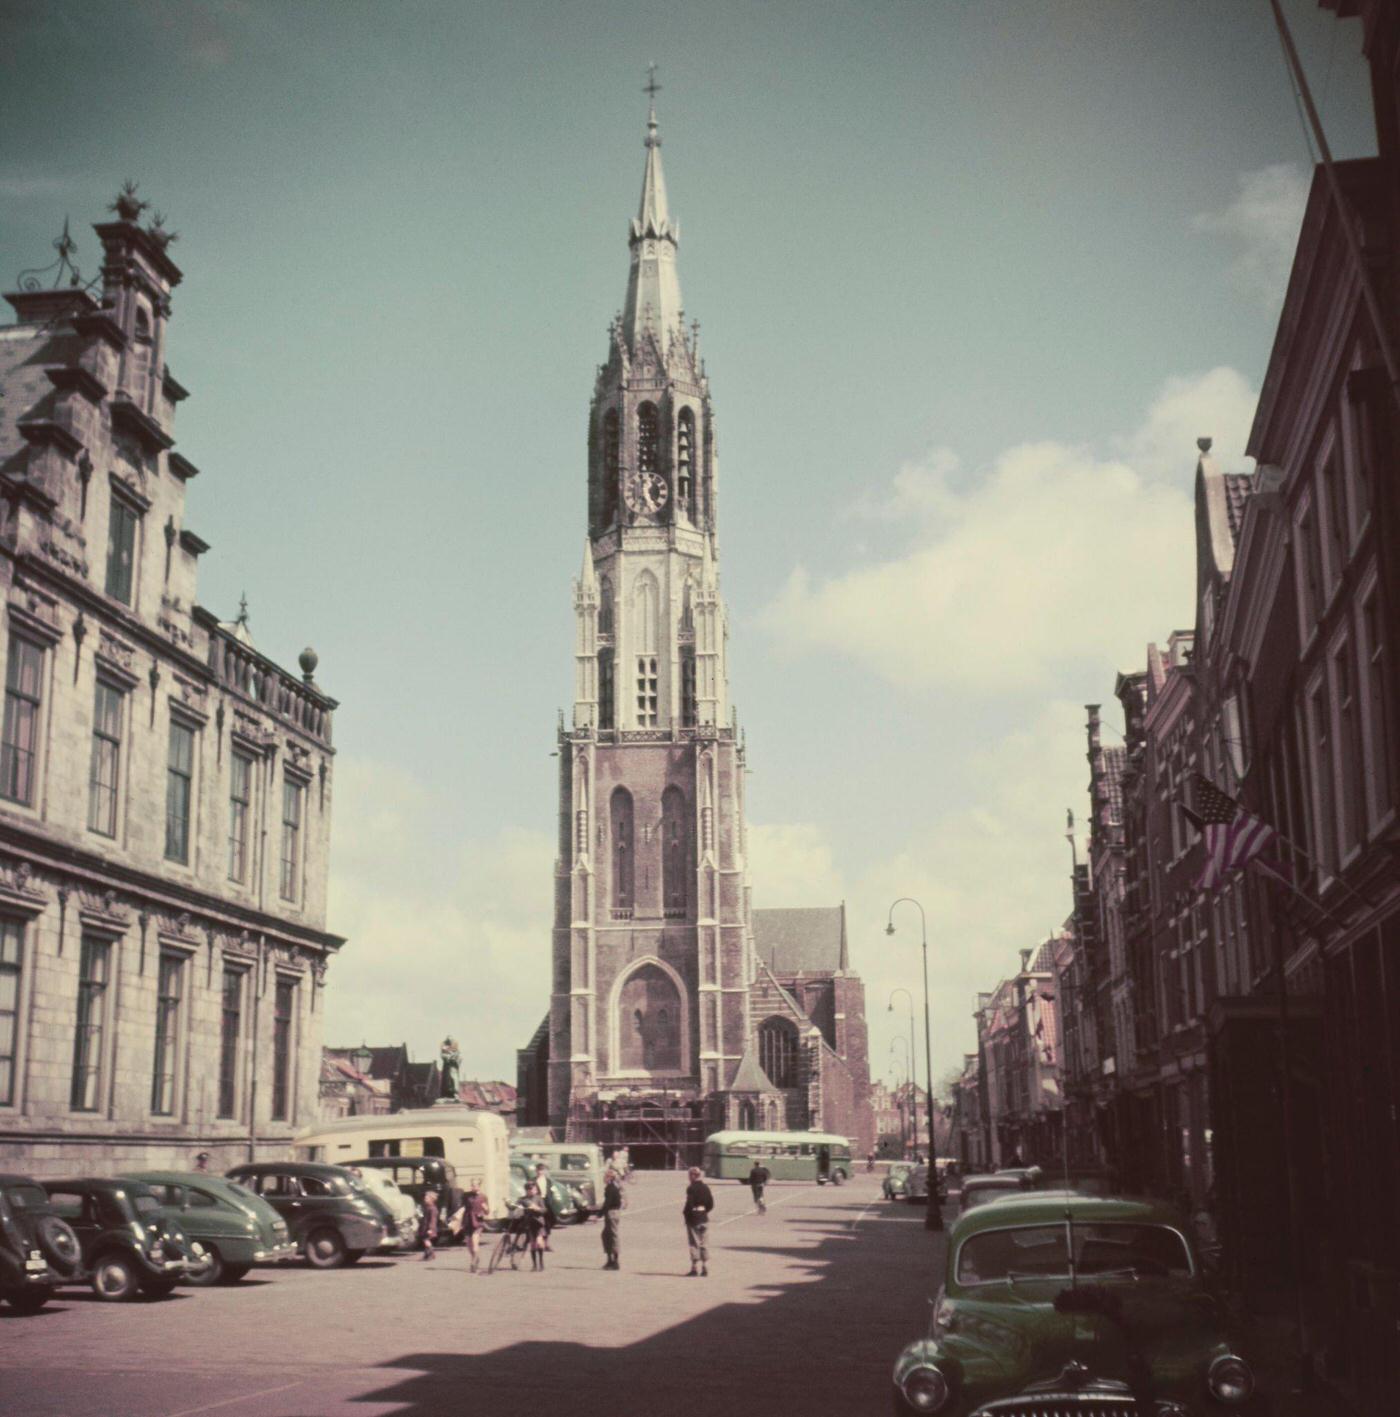 Pedestrians pass cars parked beside City Hall on Markt Square in front of Nieuwe Kerk Protestant church in the center of the city of Delft in the province of South Holland in the Netherlands 1950.